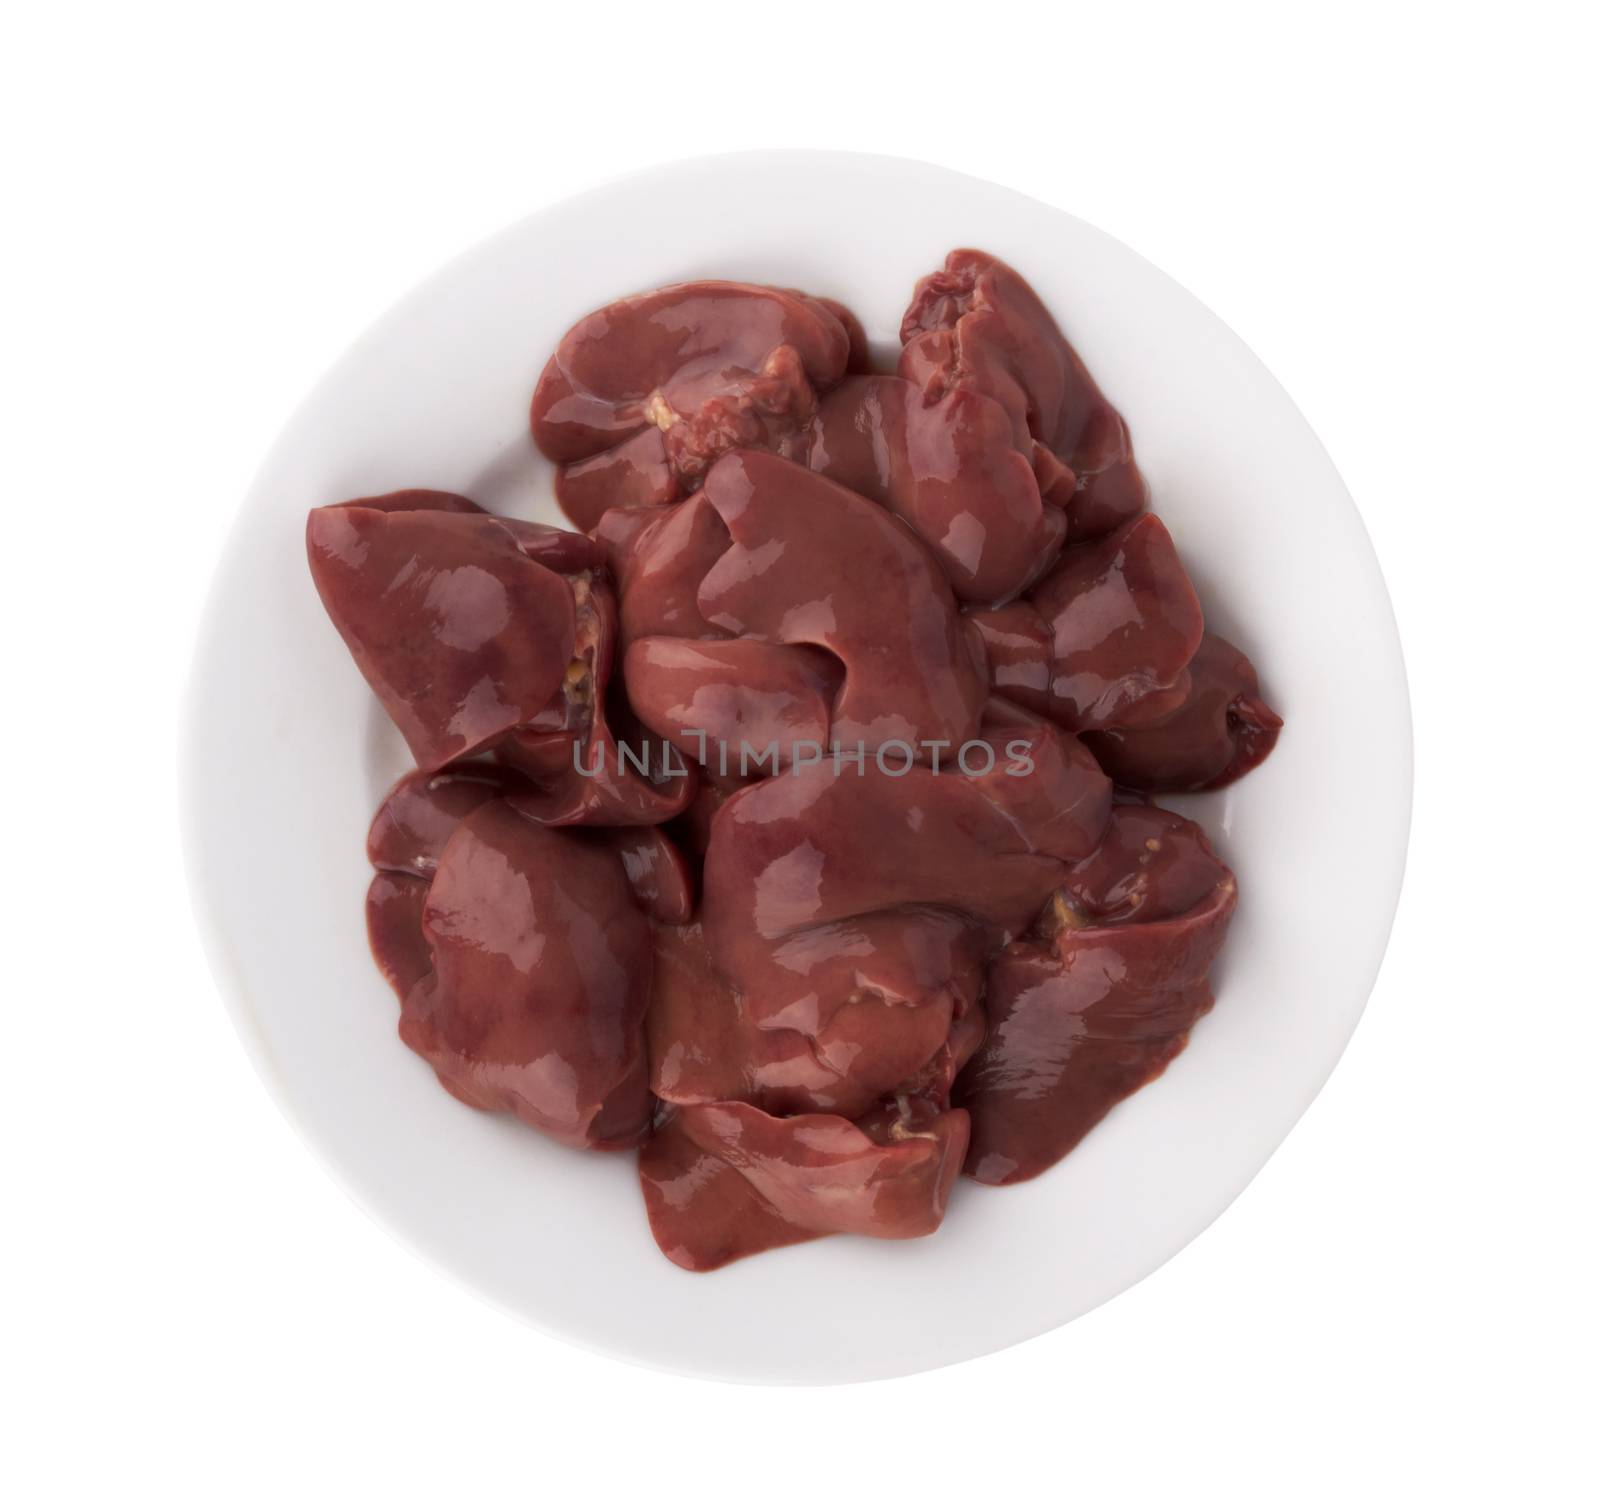 raw chicken liver by pioneer111